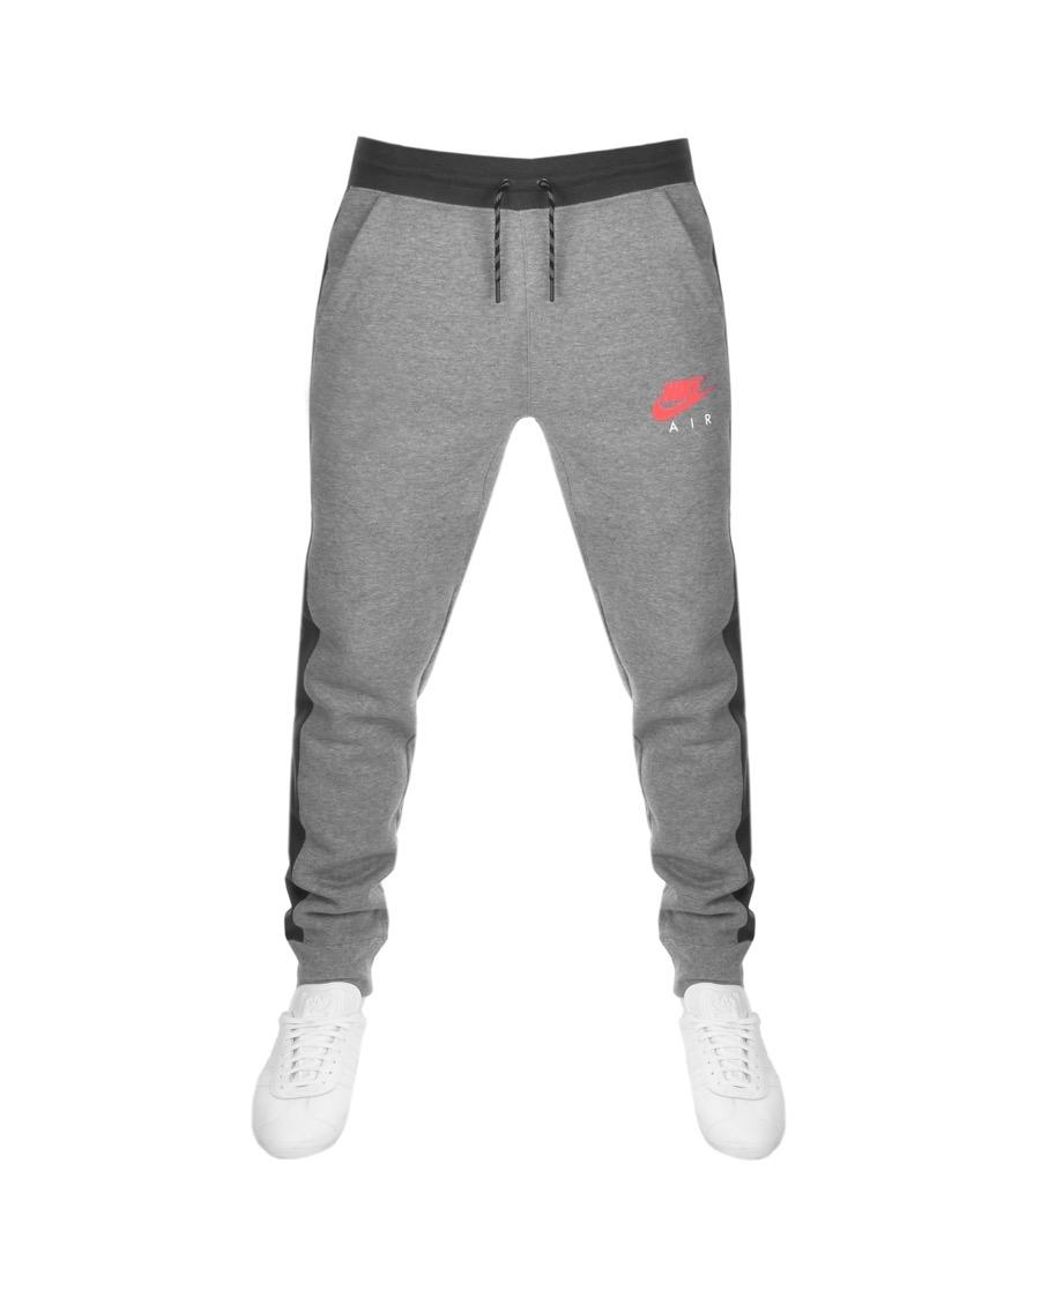 Nike Air Max Tracksuit Grey Seller Online, 48% OFF | maikyaulaw.com